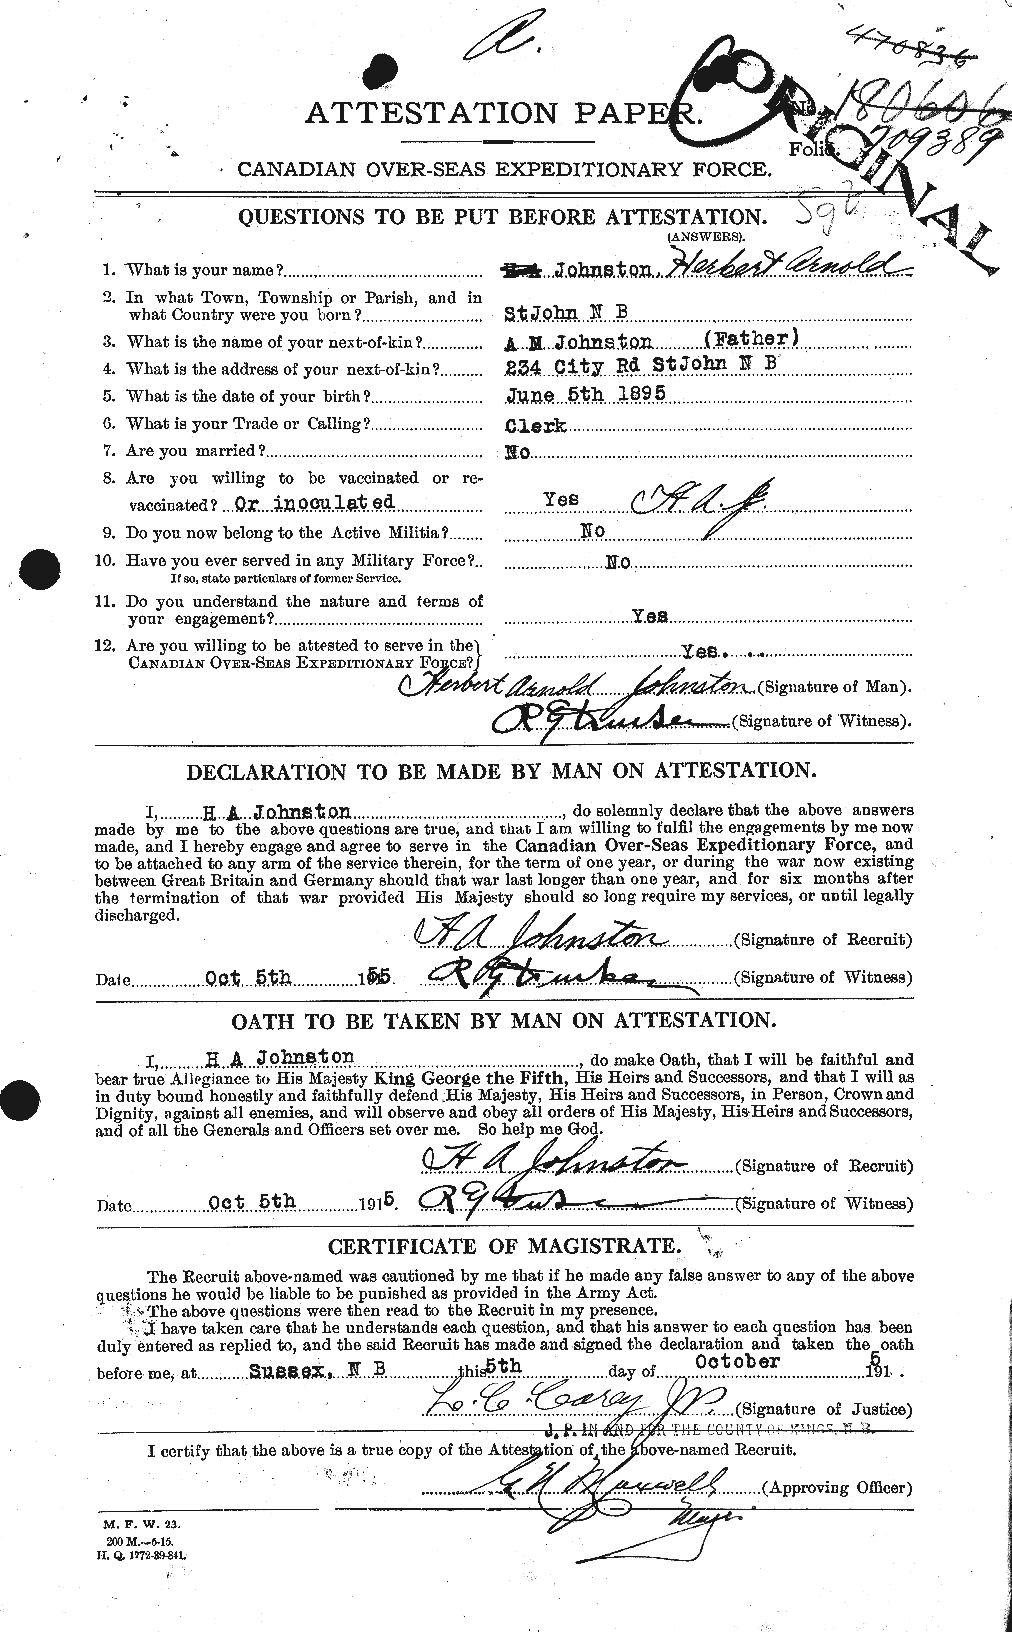 Personnel Records of the First World War - CEF 419551a